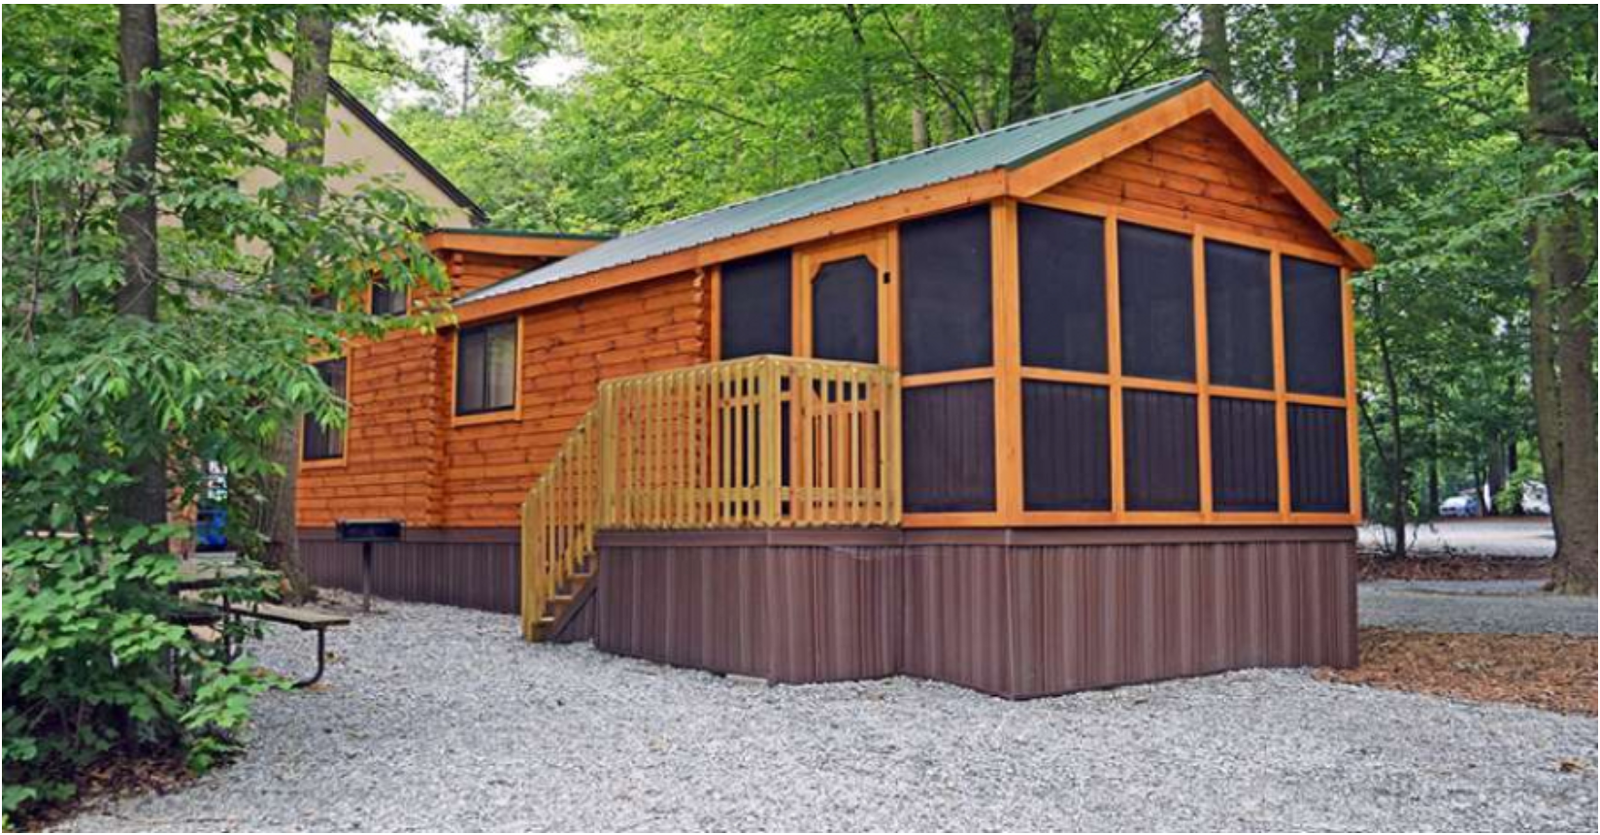 Park Model Log Cabin from $21,950 Click to View More Photos